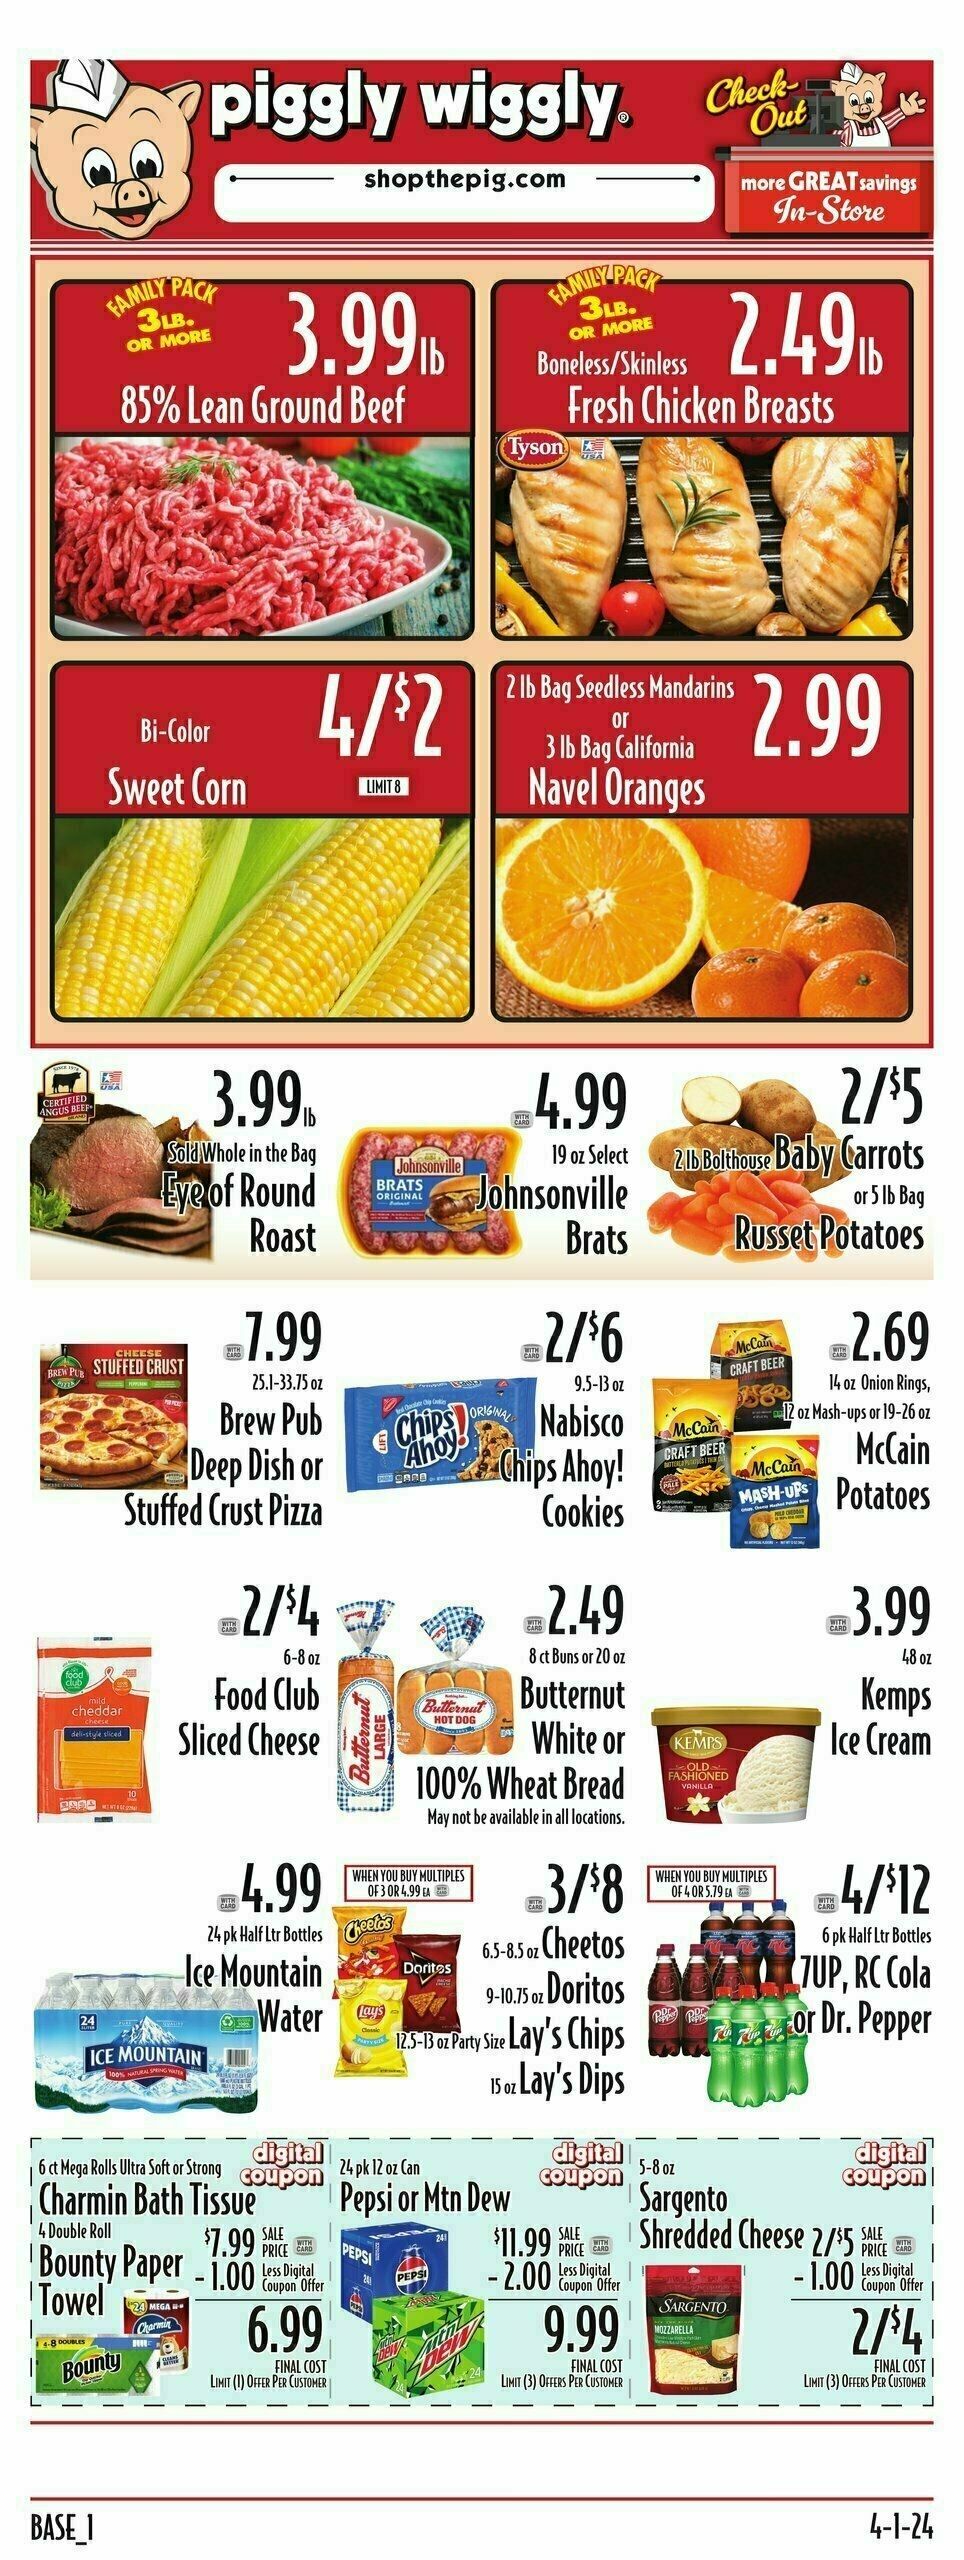 Piggly Wiggly Weekly Ad from April 3